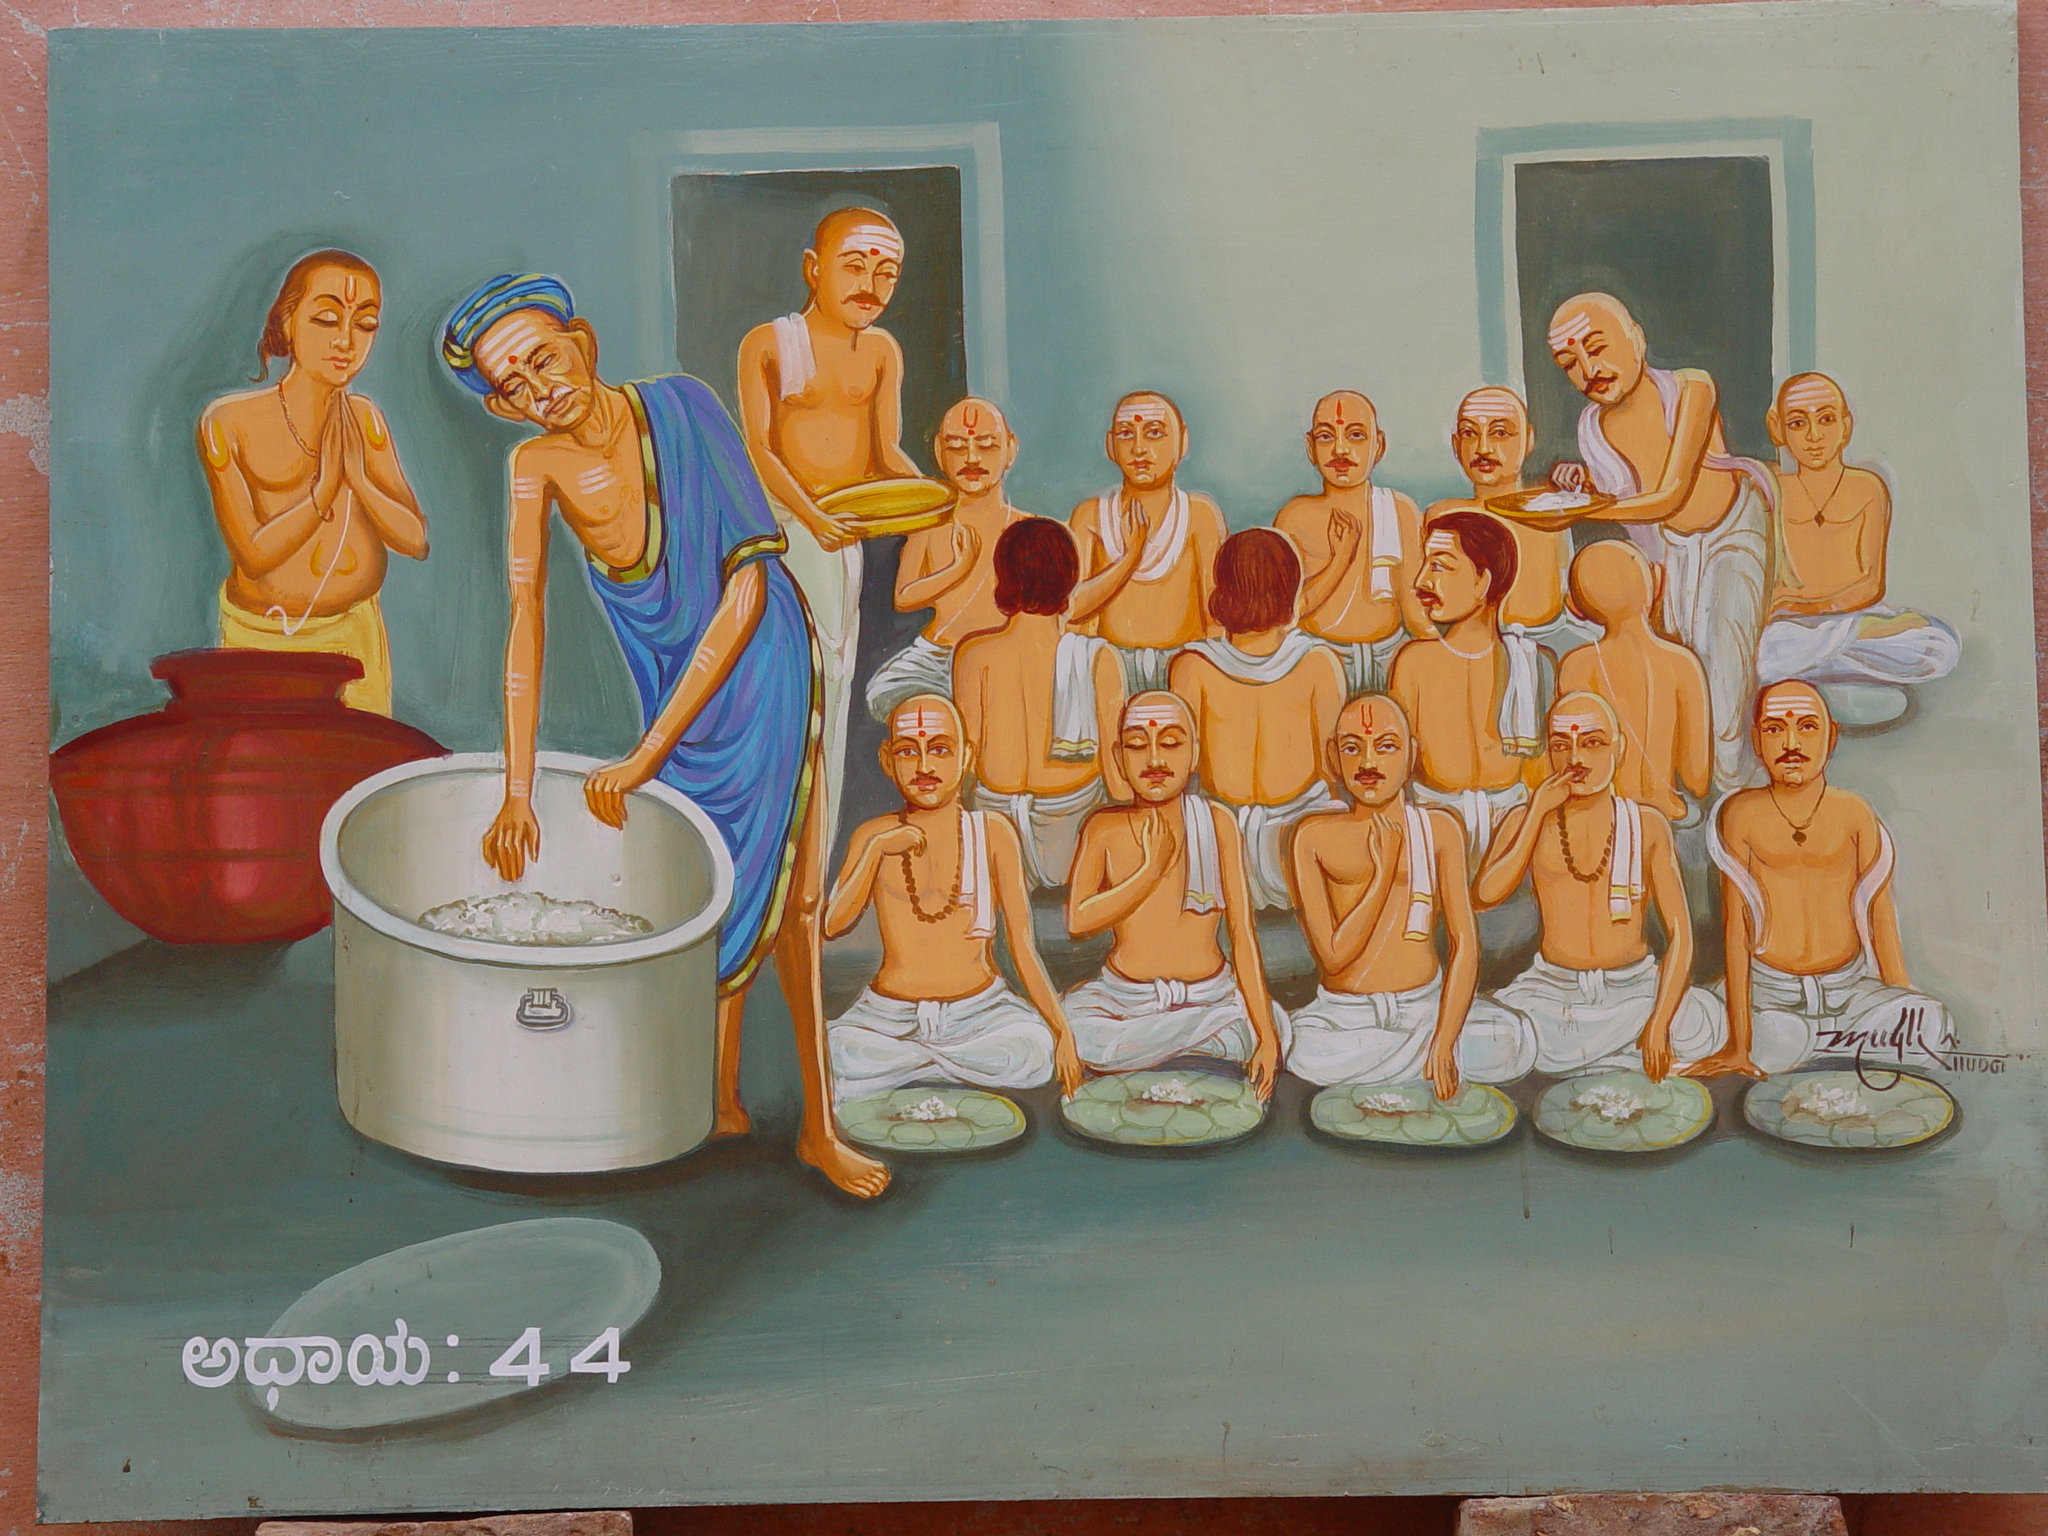 The detached Shastri held the Lotus-feet of Siddha